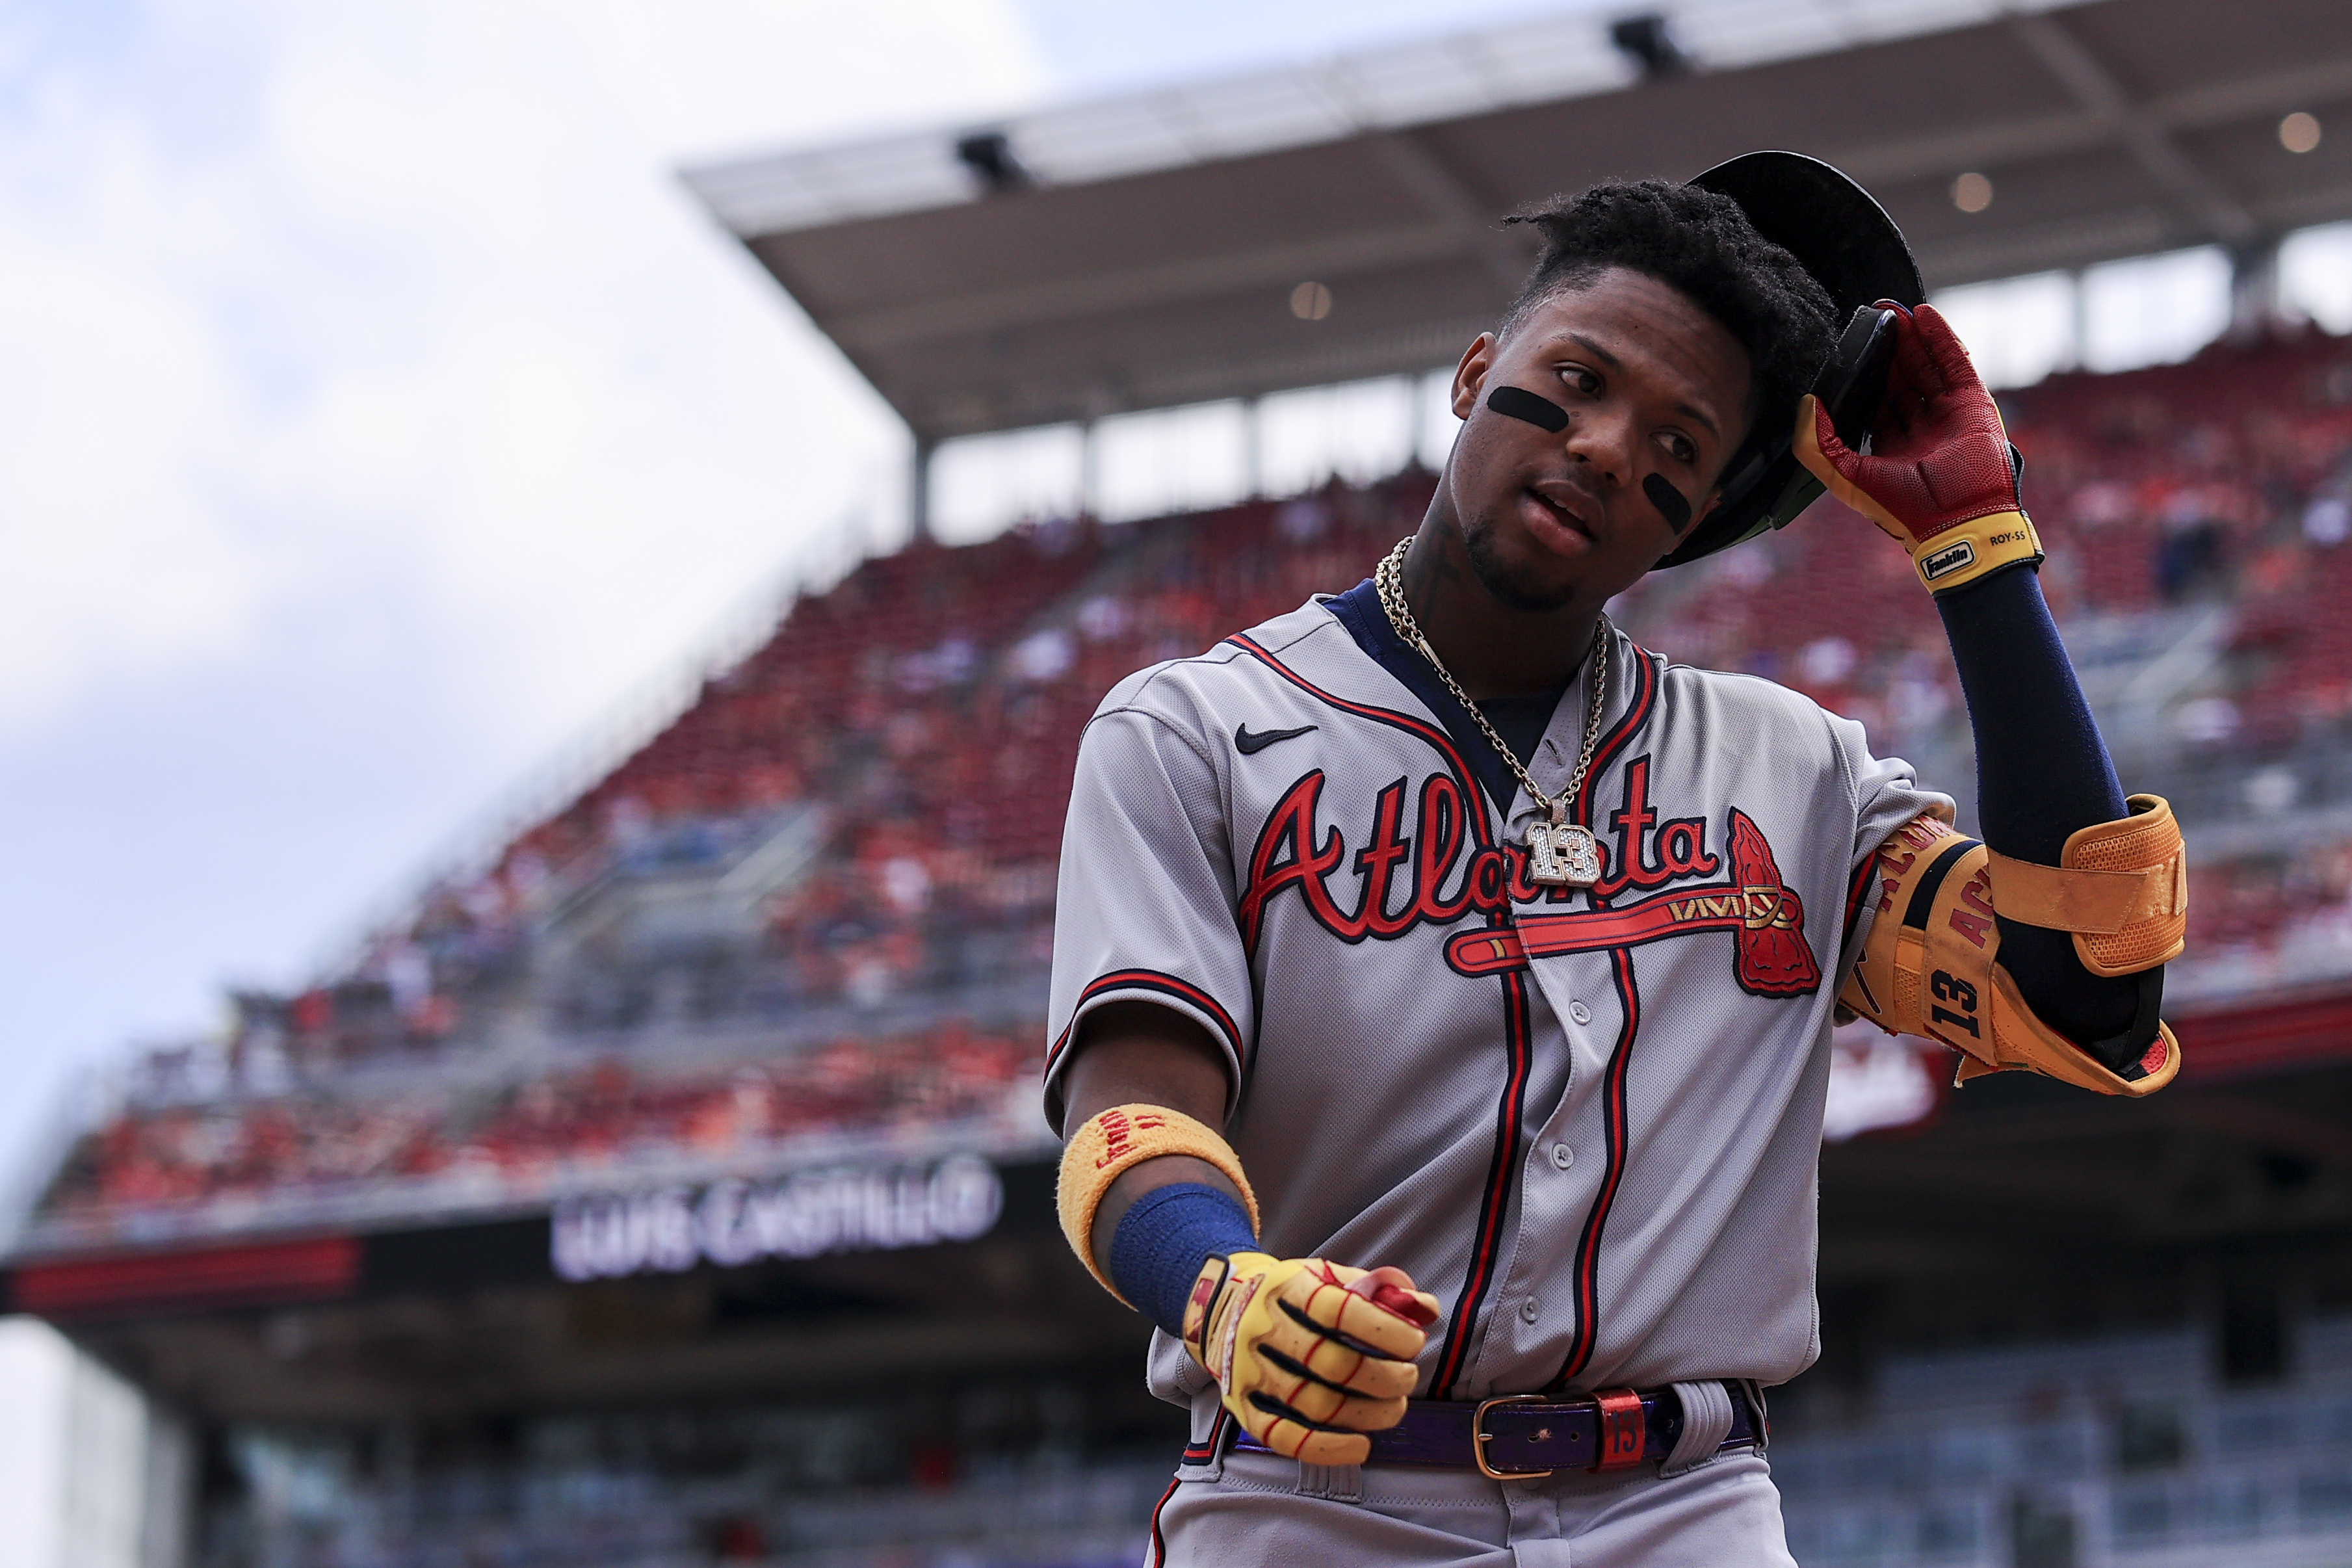 June 26, 2021 game: Reds 4, Braves 1